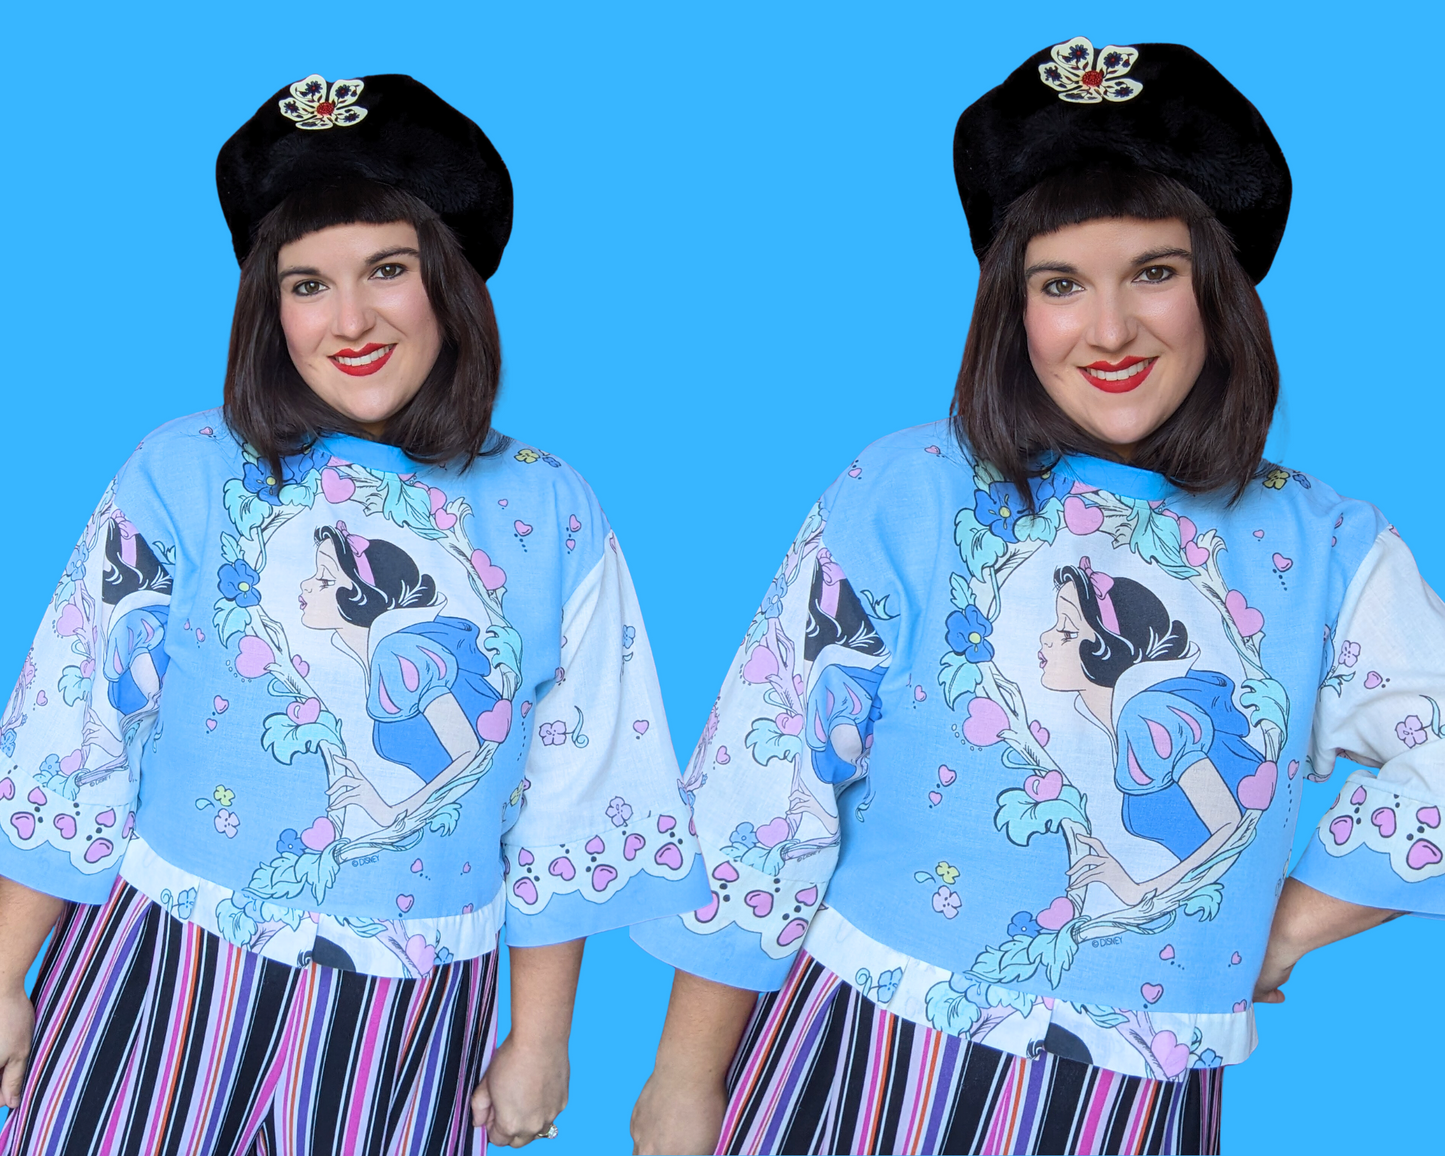 Handmade, Upcycled Walt Disney's Snow White and the Seven Dwarves Bedsheet Crop Top Oversized XS - Fits Like A Size M